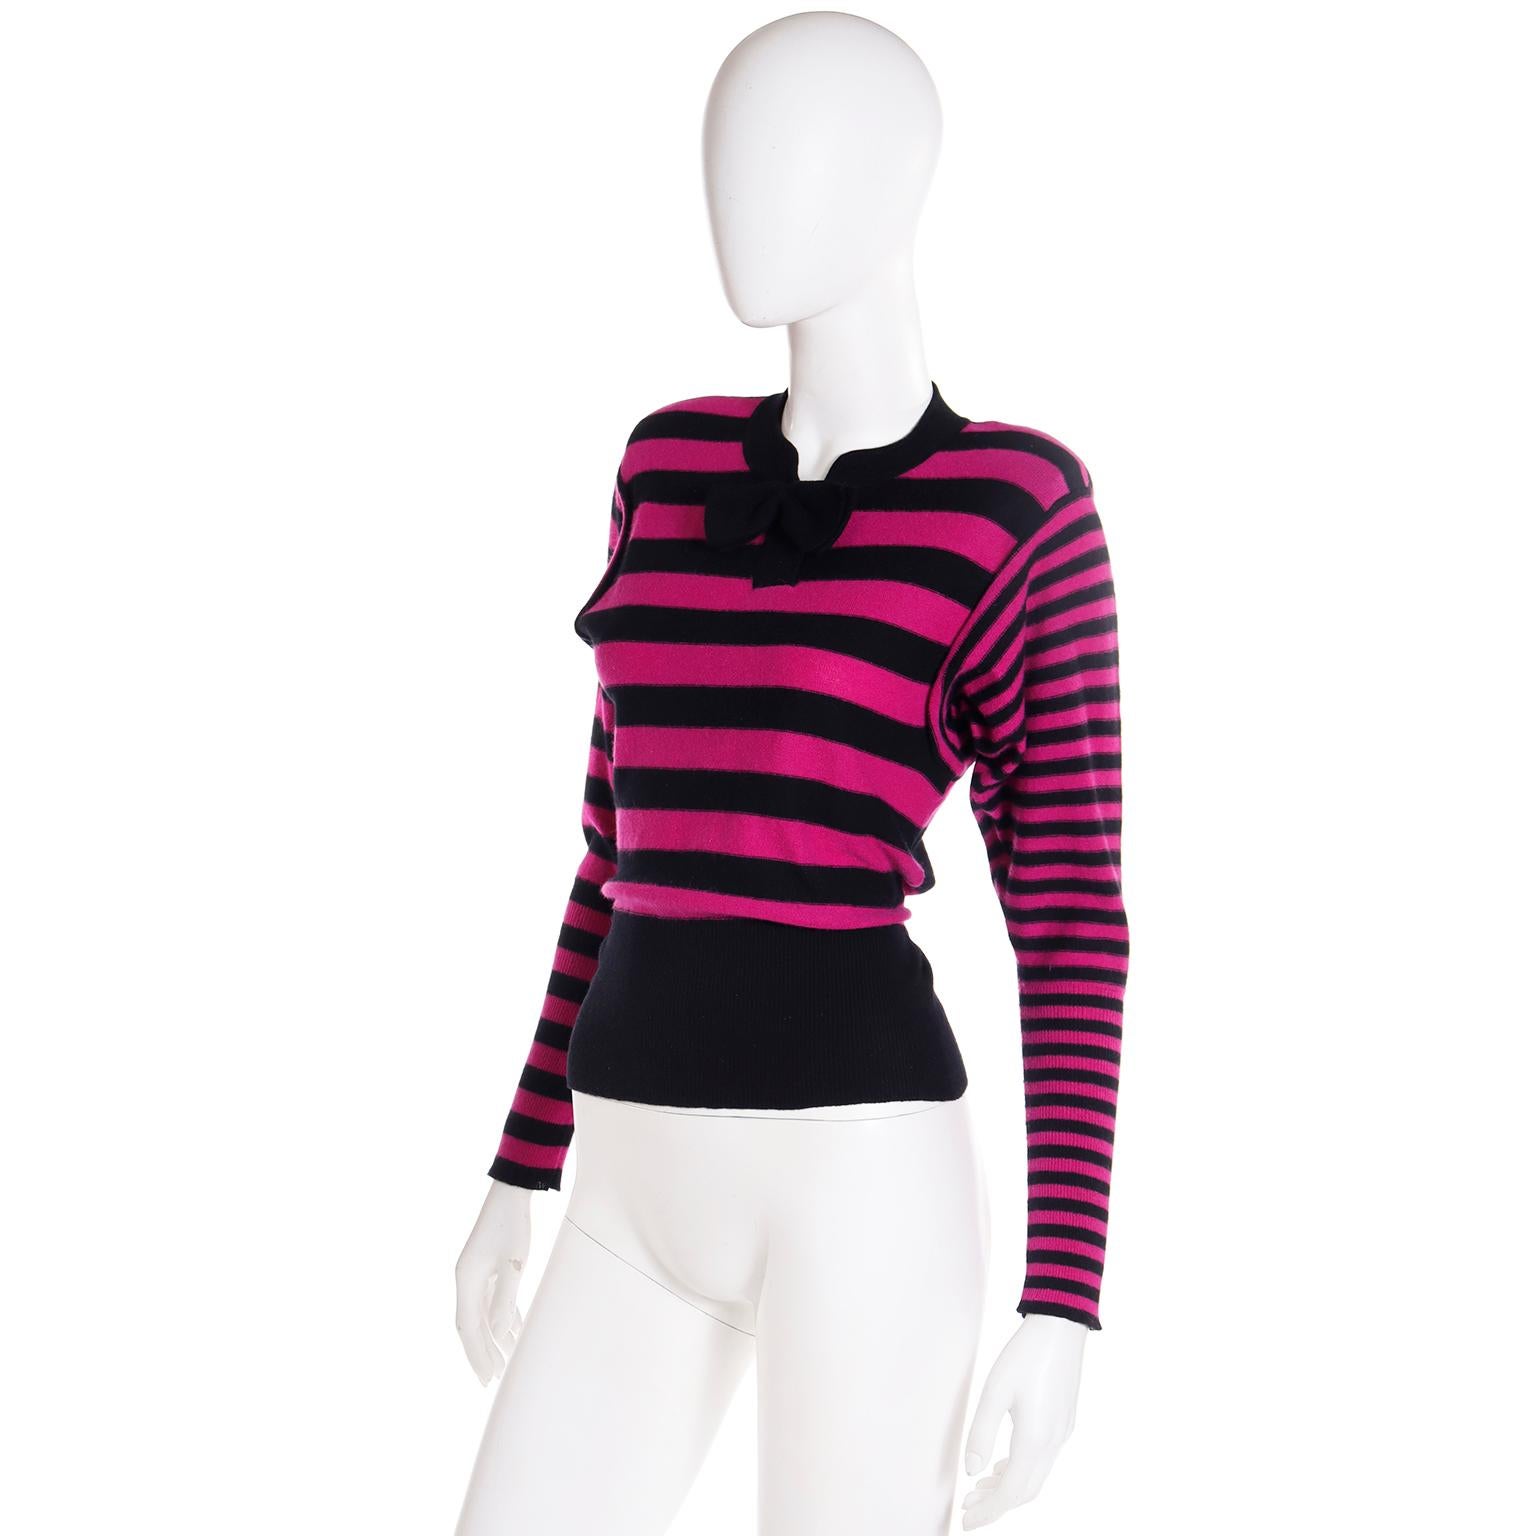 Sonia Rykiel Vintage Pink & Black Wool Bow Sweater Top In Excellent Condition For Sale In Portland, OR